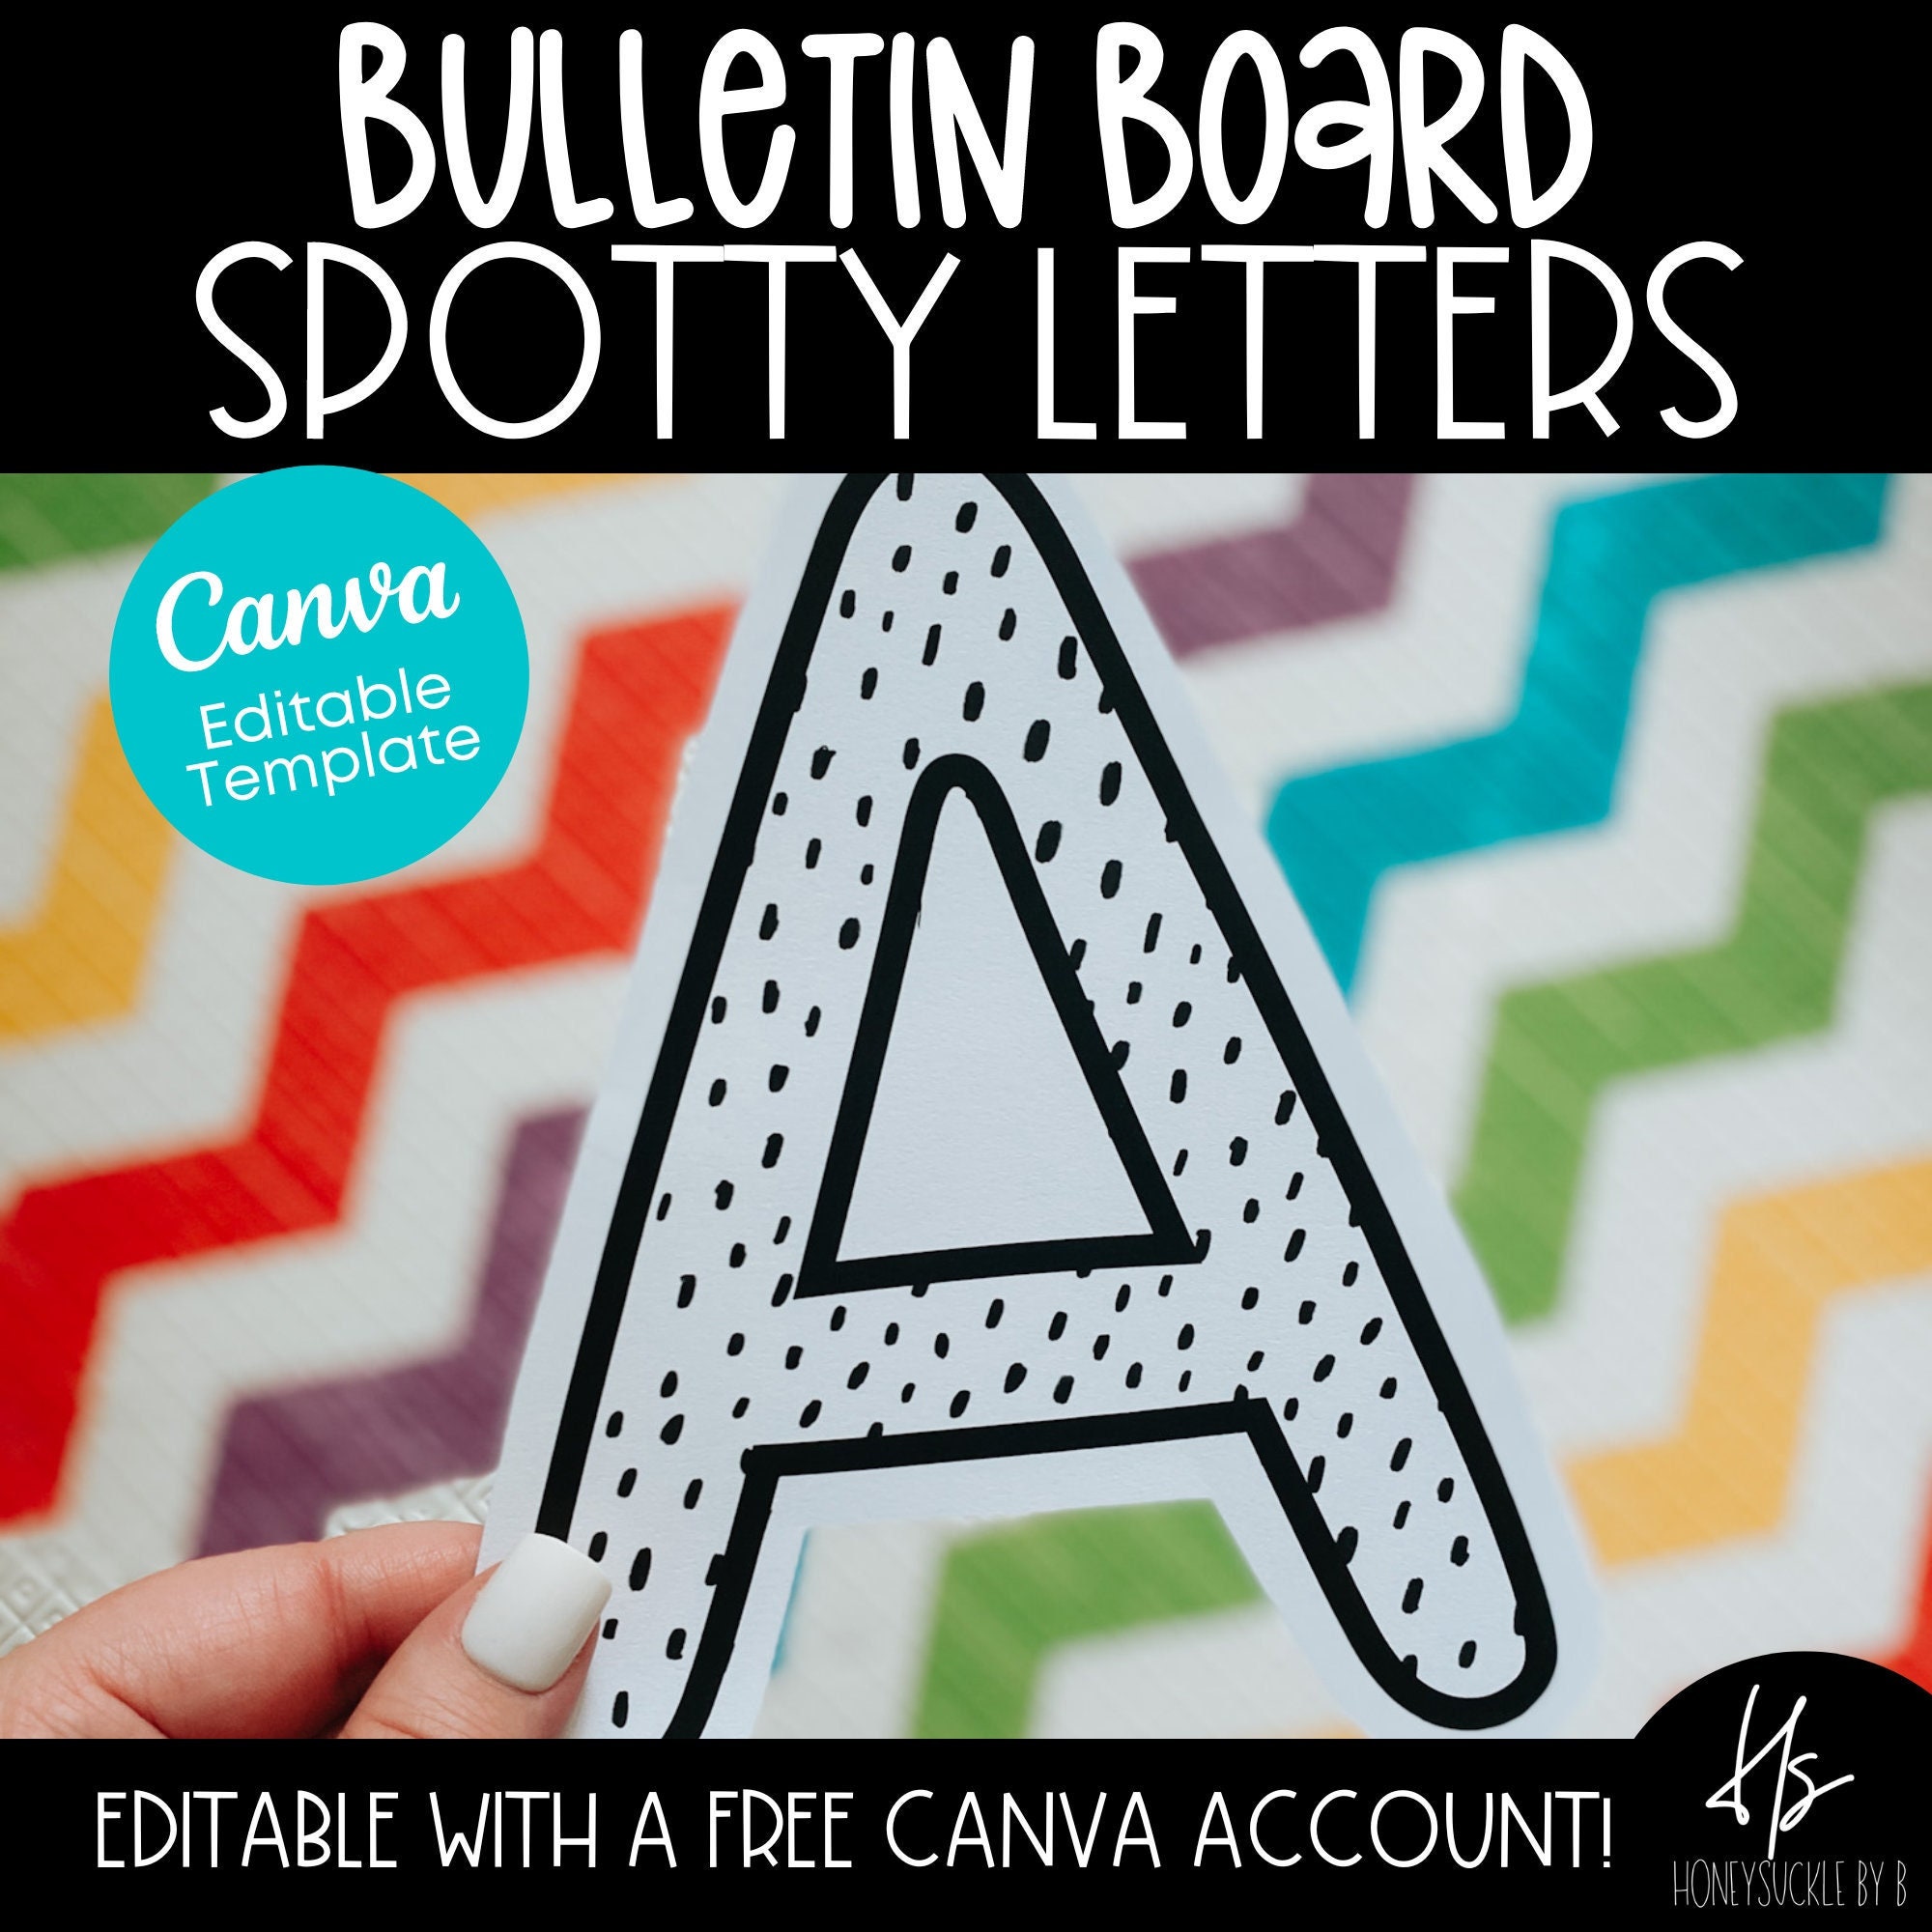 Free Goods Classroom Bulletin Board Lettering Pack - Editable